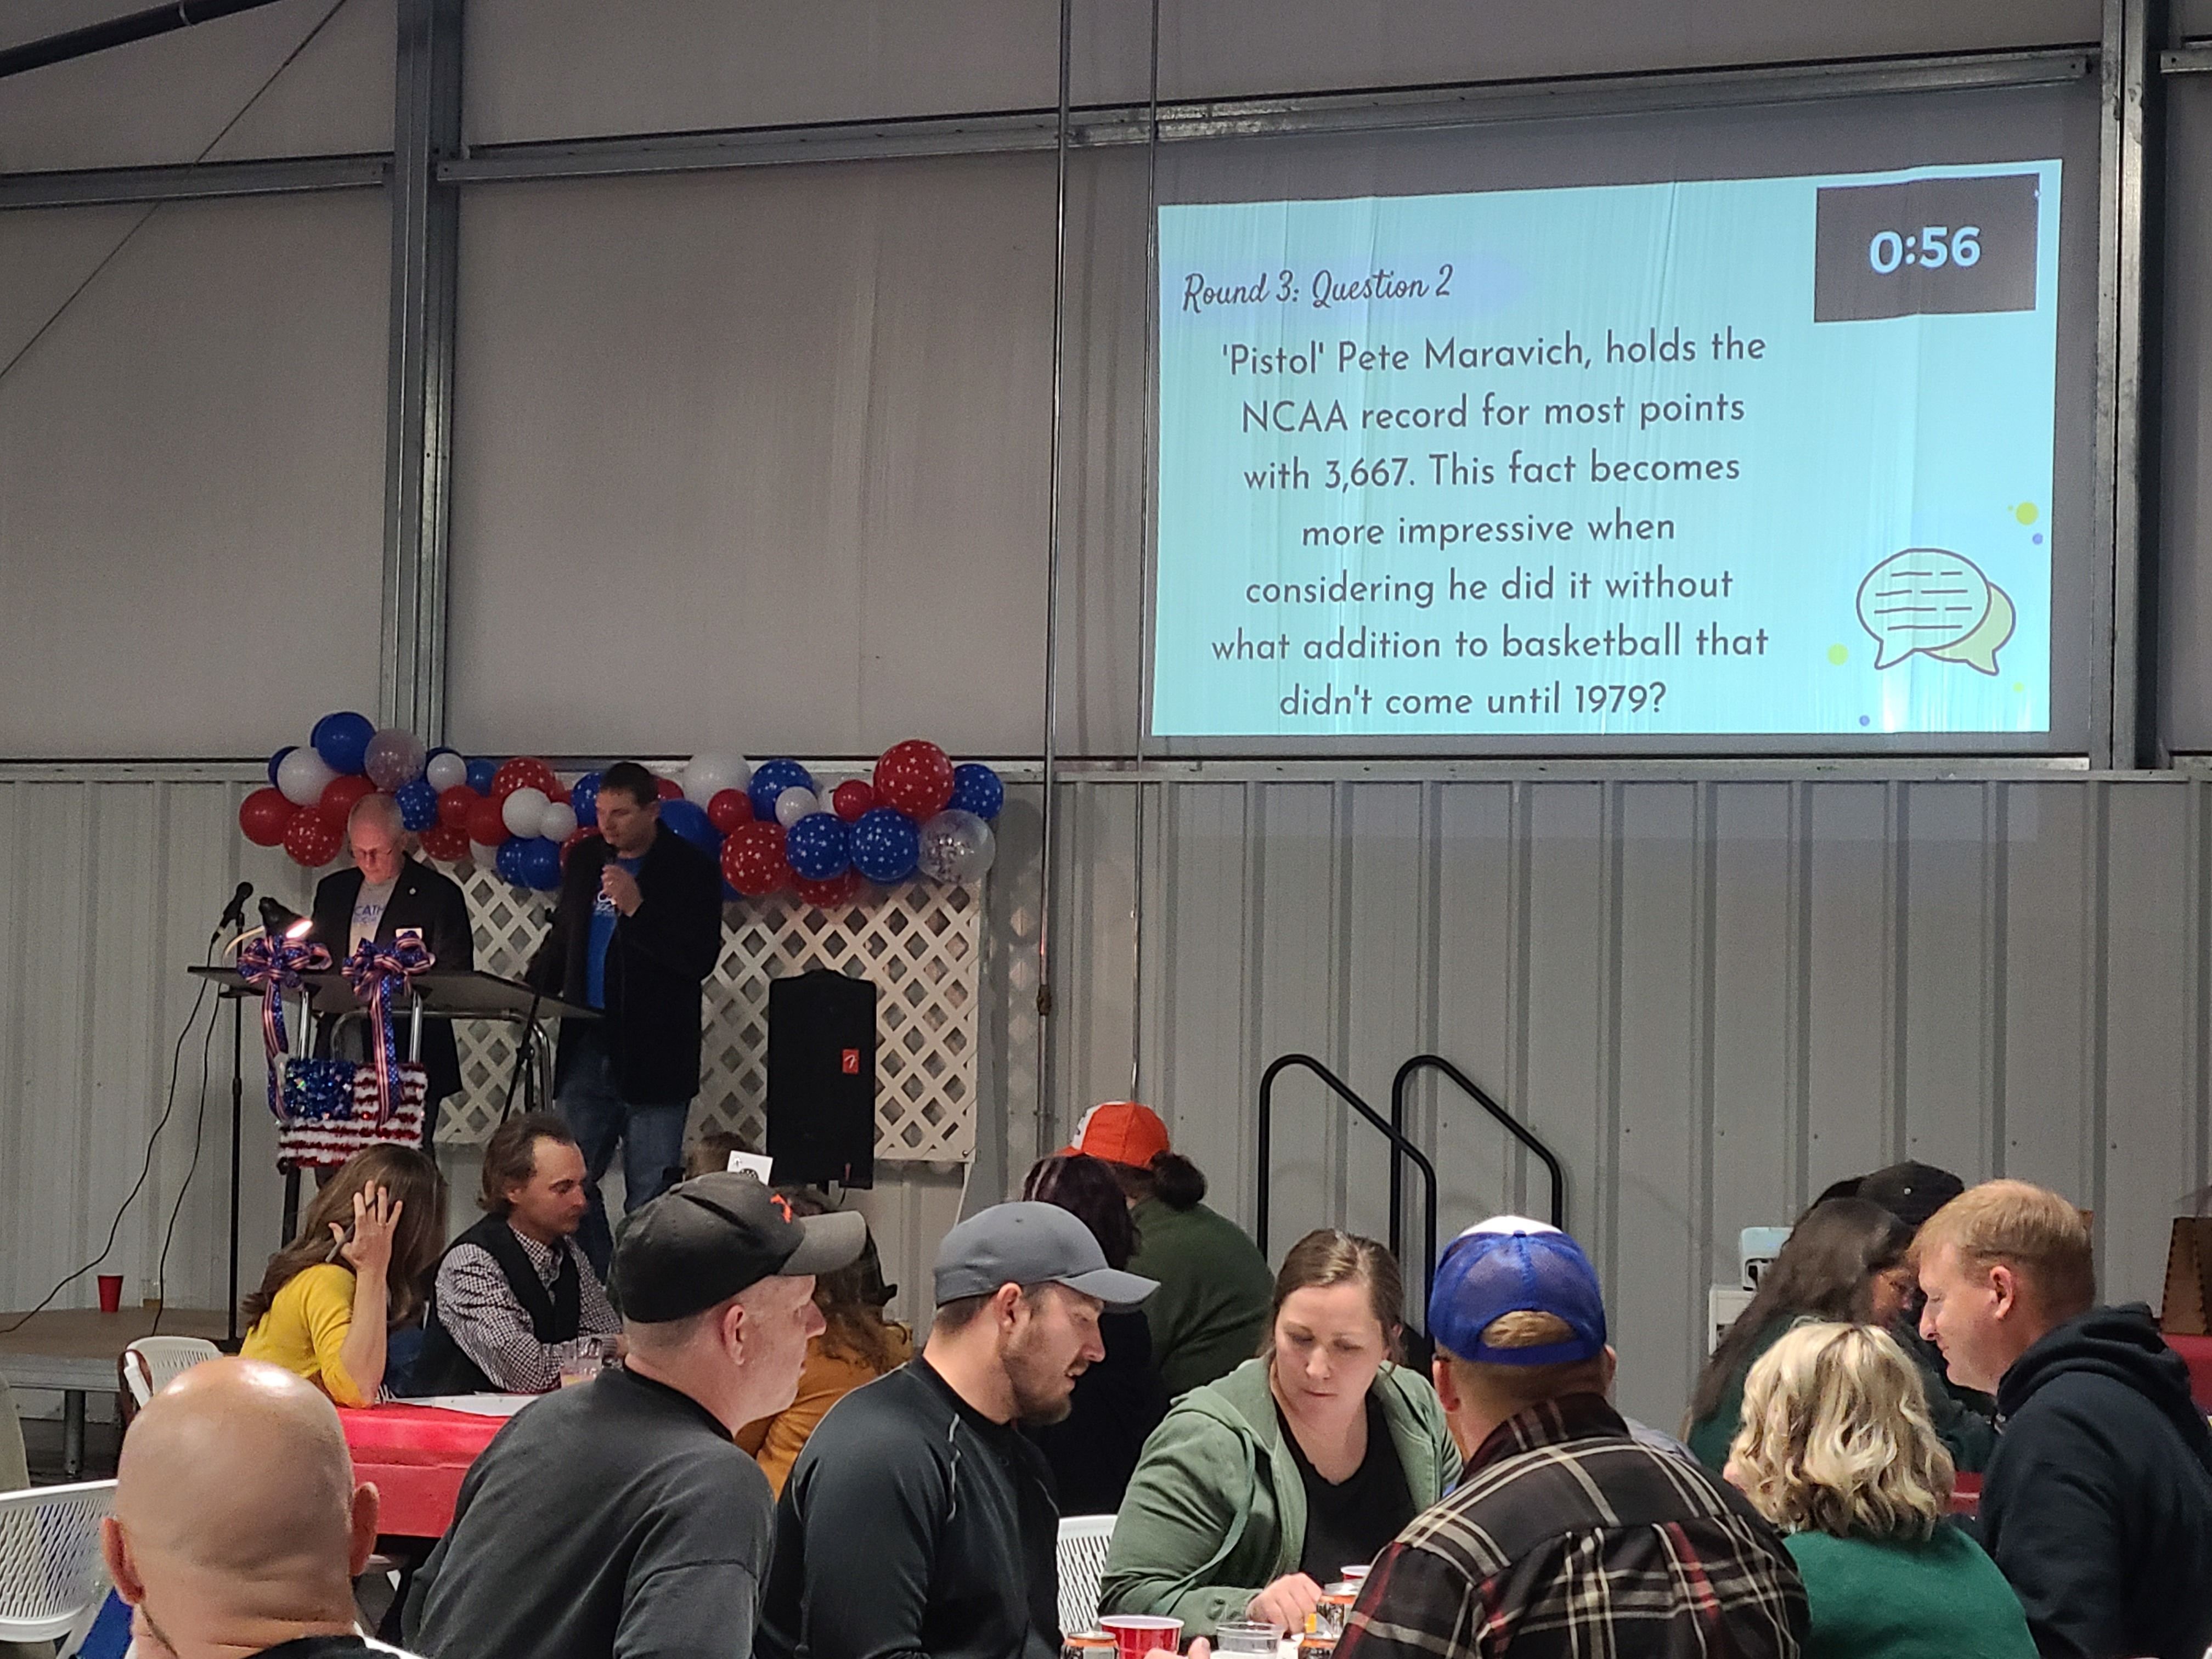 Successful Trivia Night Raises Funds for CSS Imperial Outreach Work